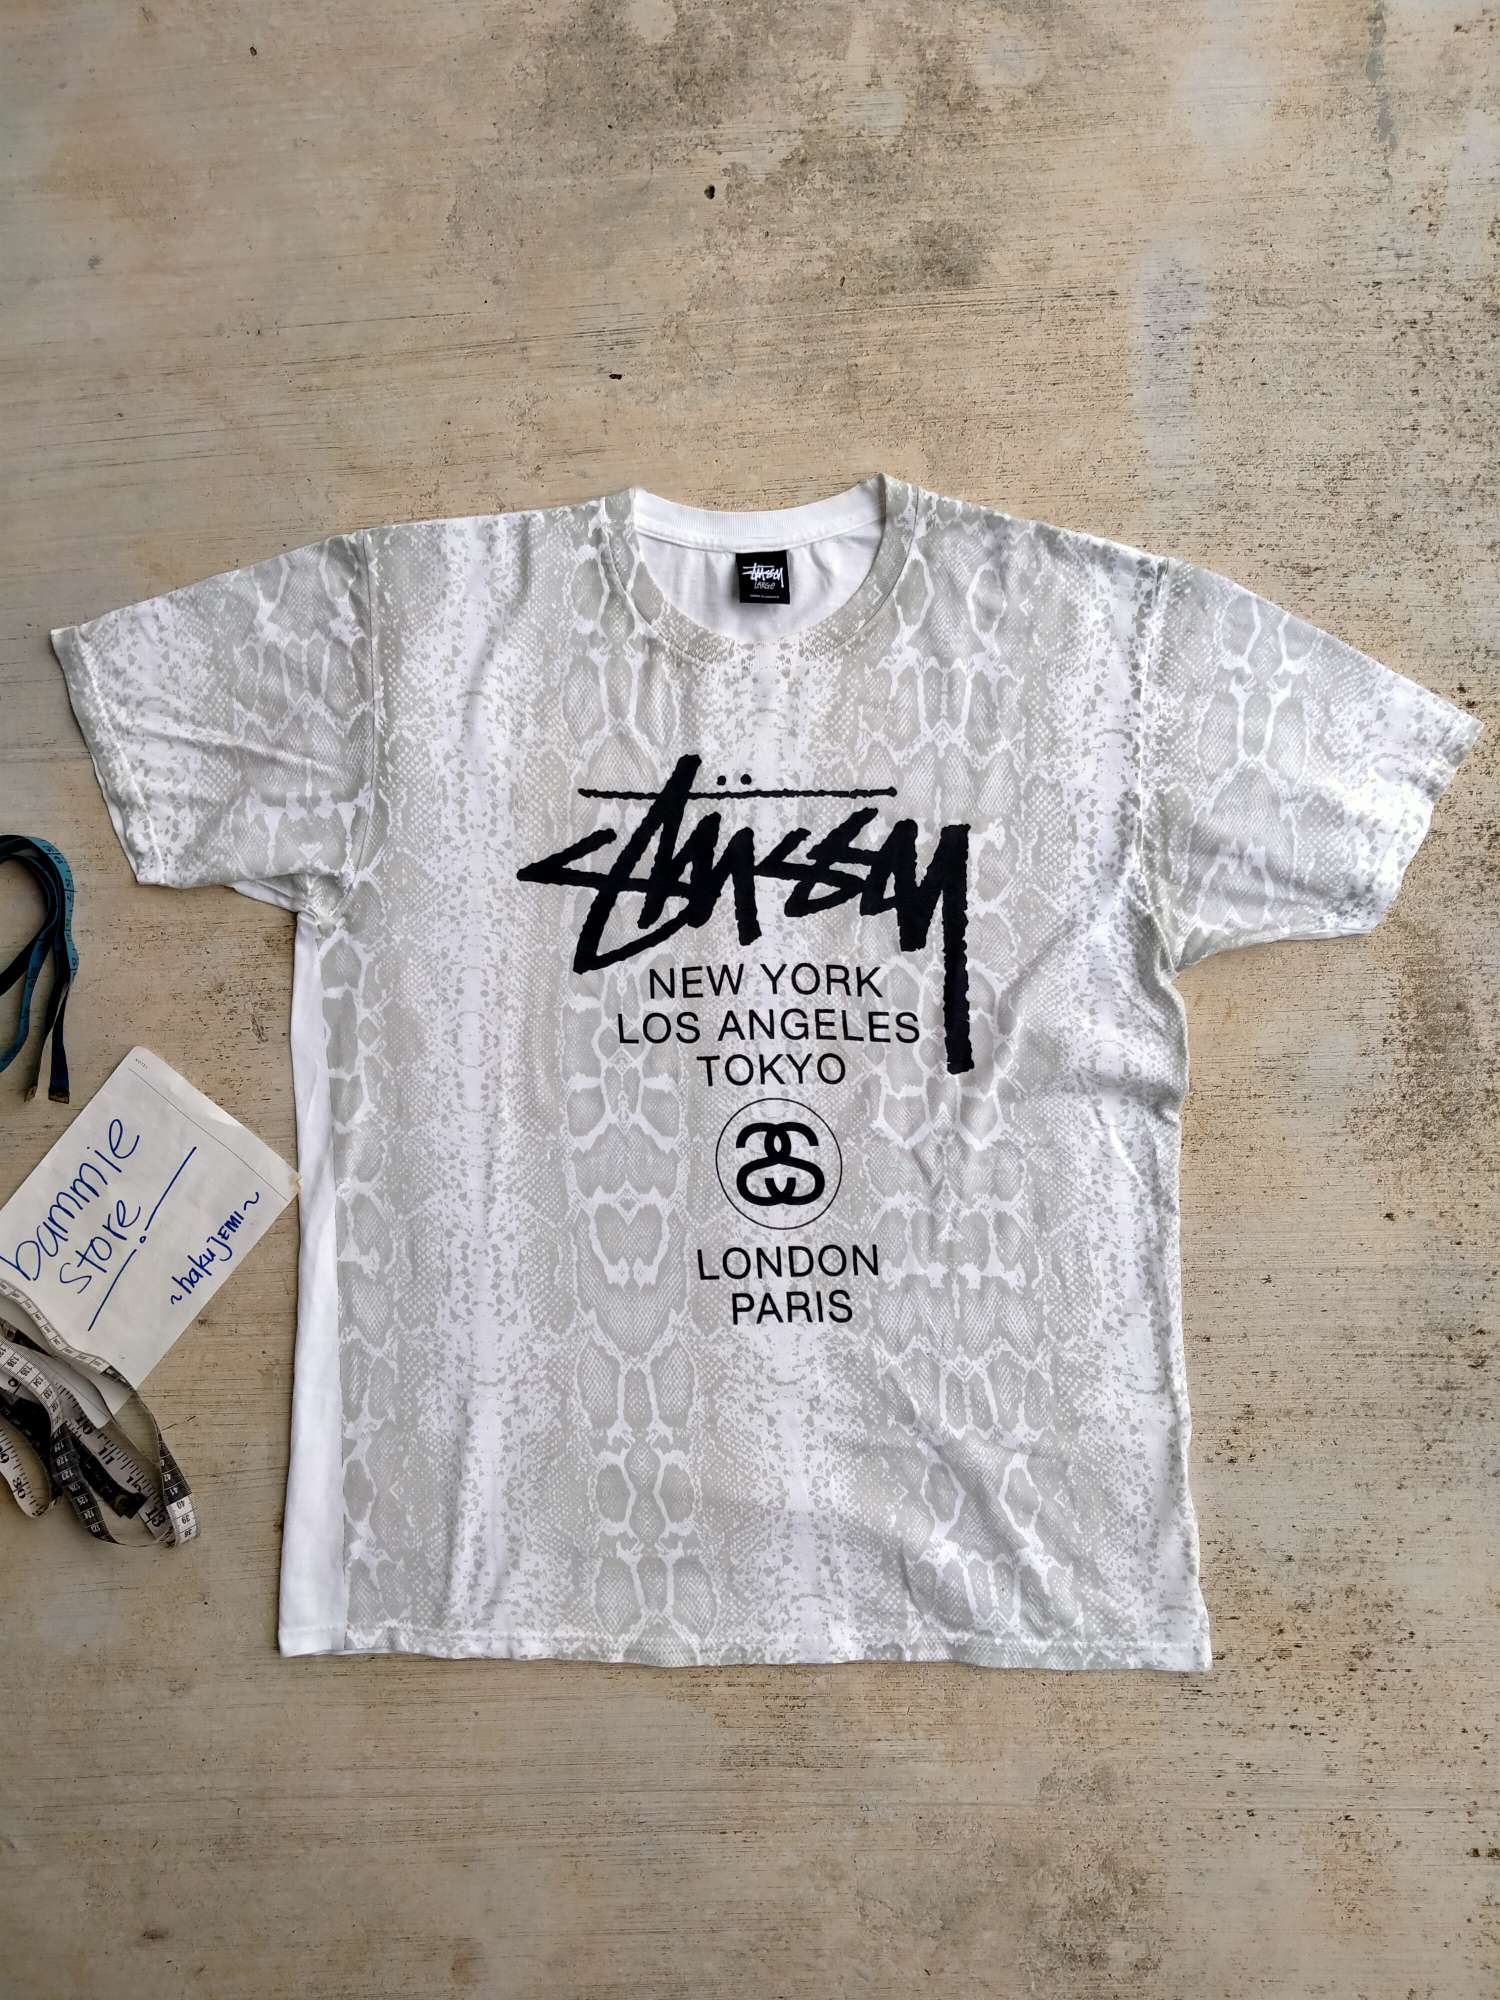 Vintage Stussy Spell Out Worldwide Tour Logo Tee